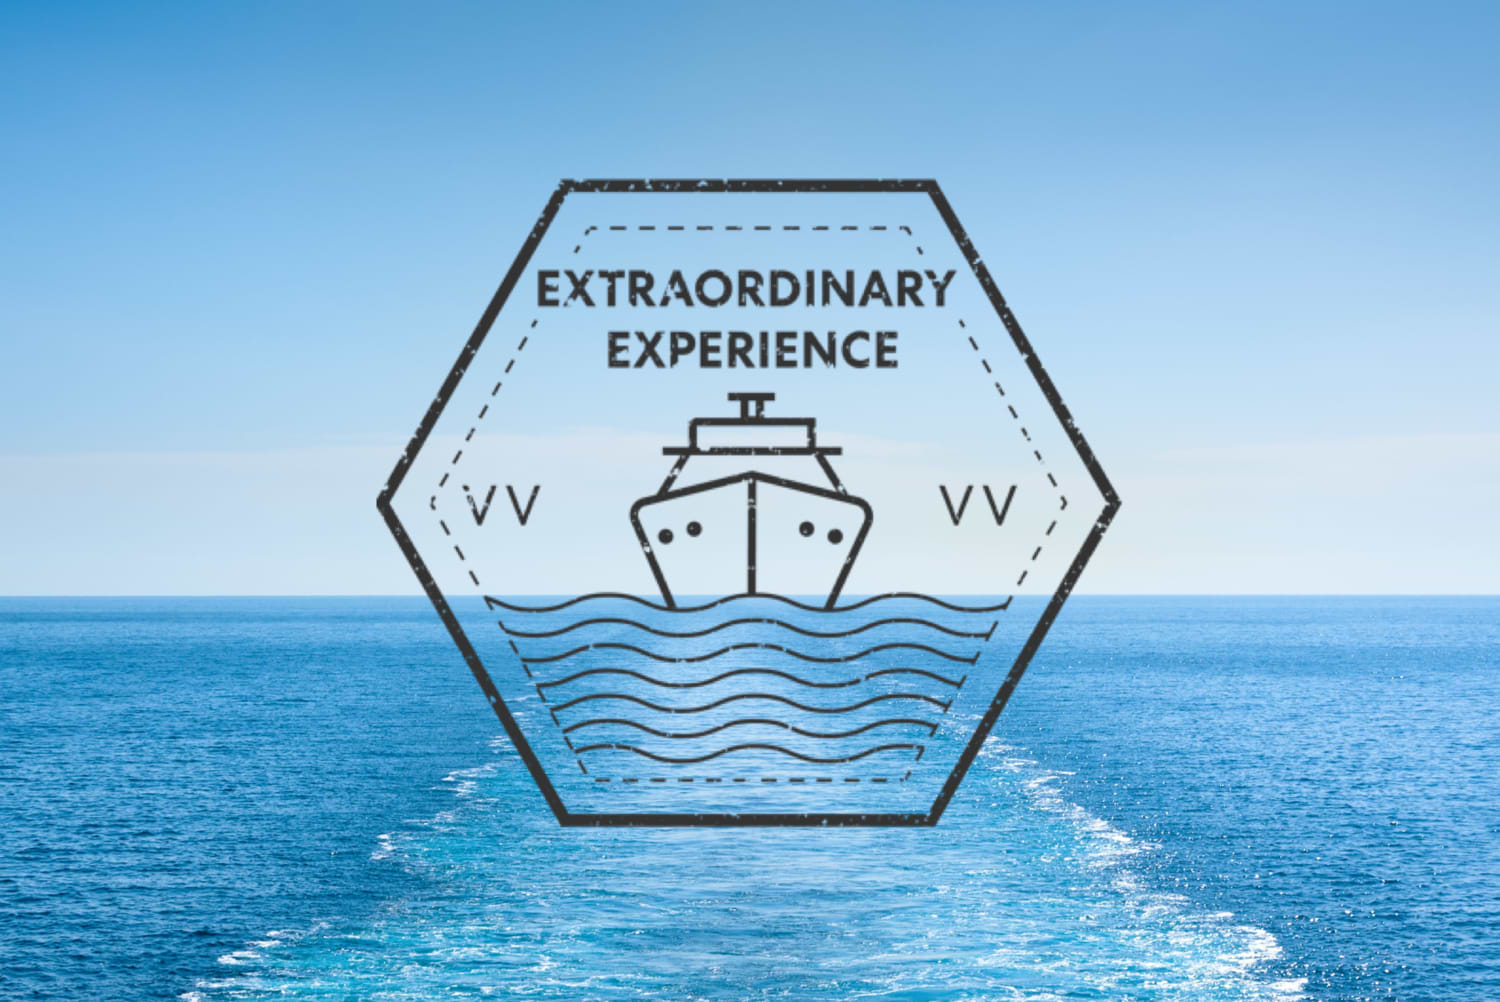 Extraordinary Experience at Virgin Voyages